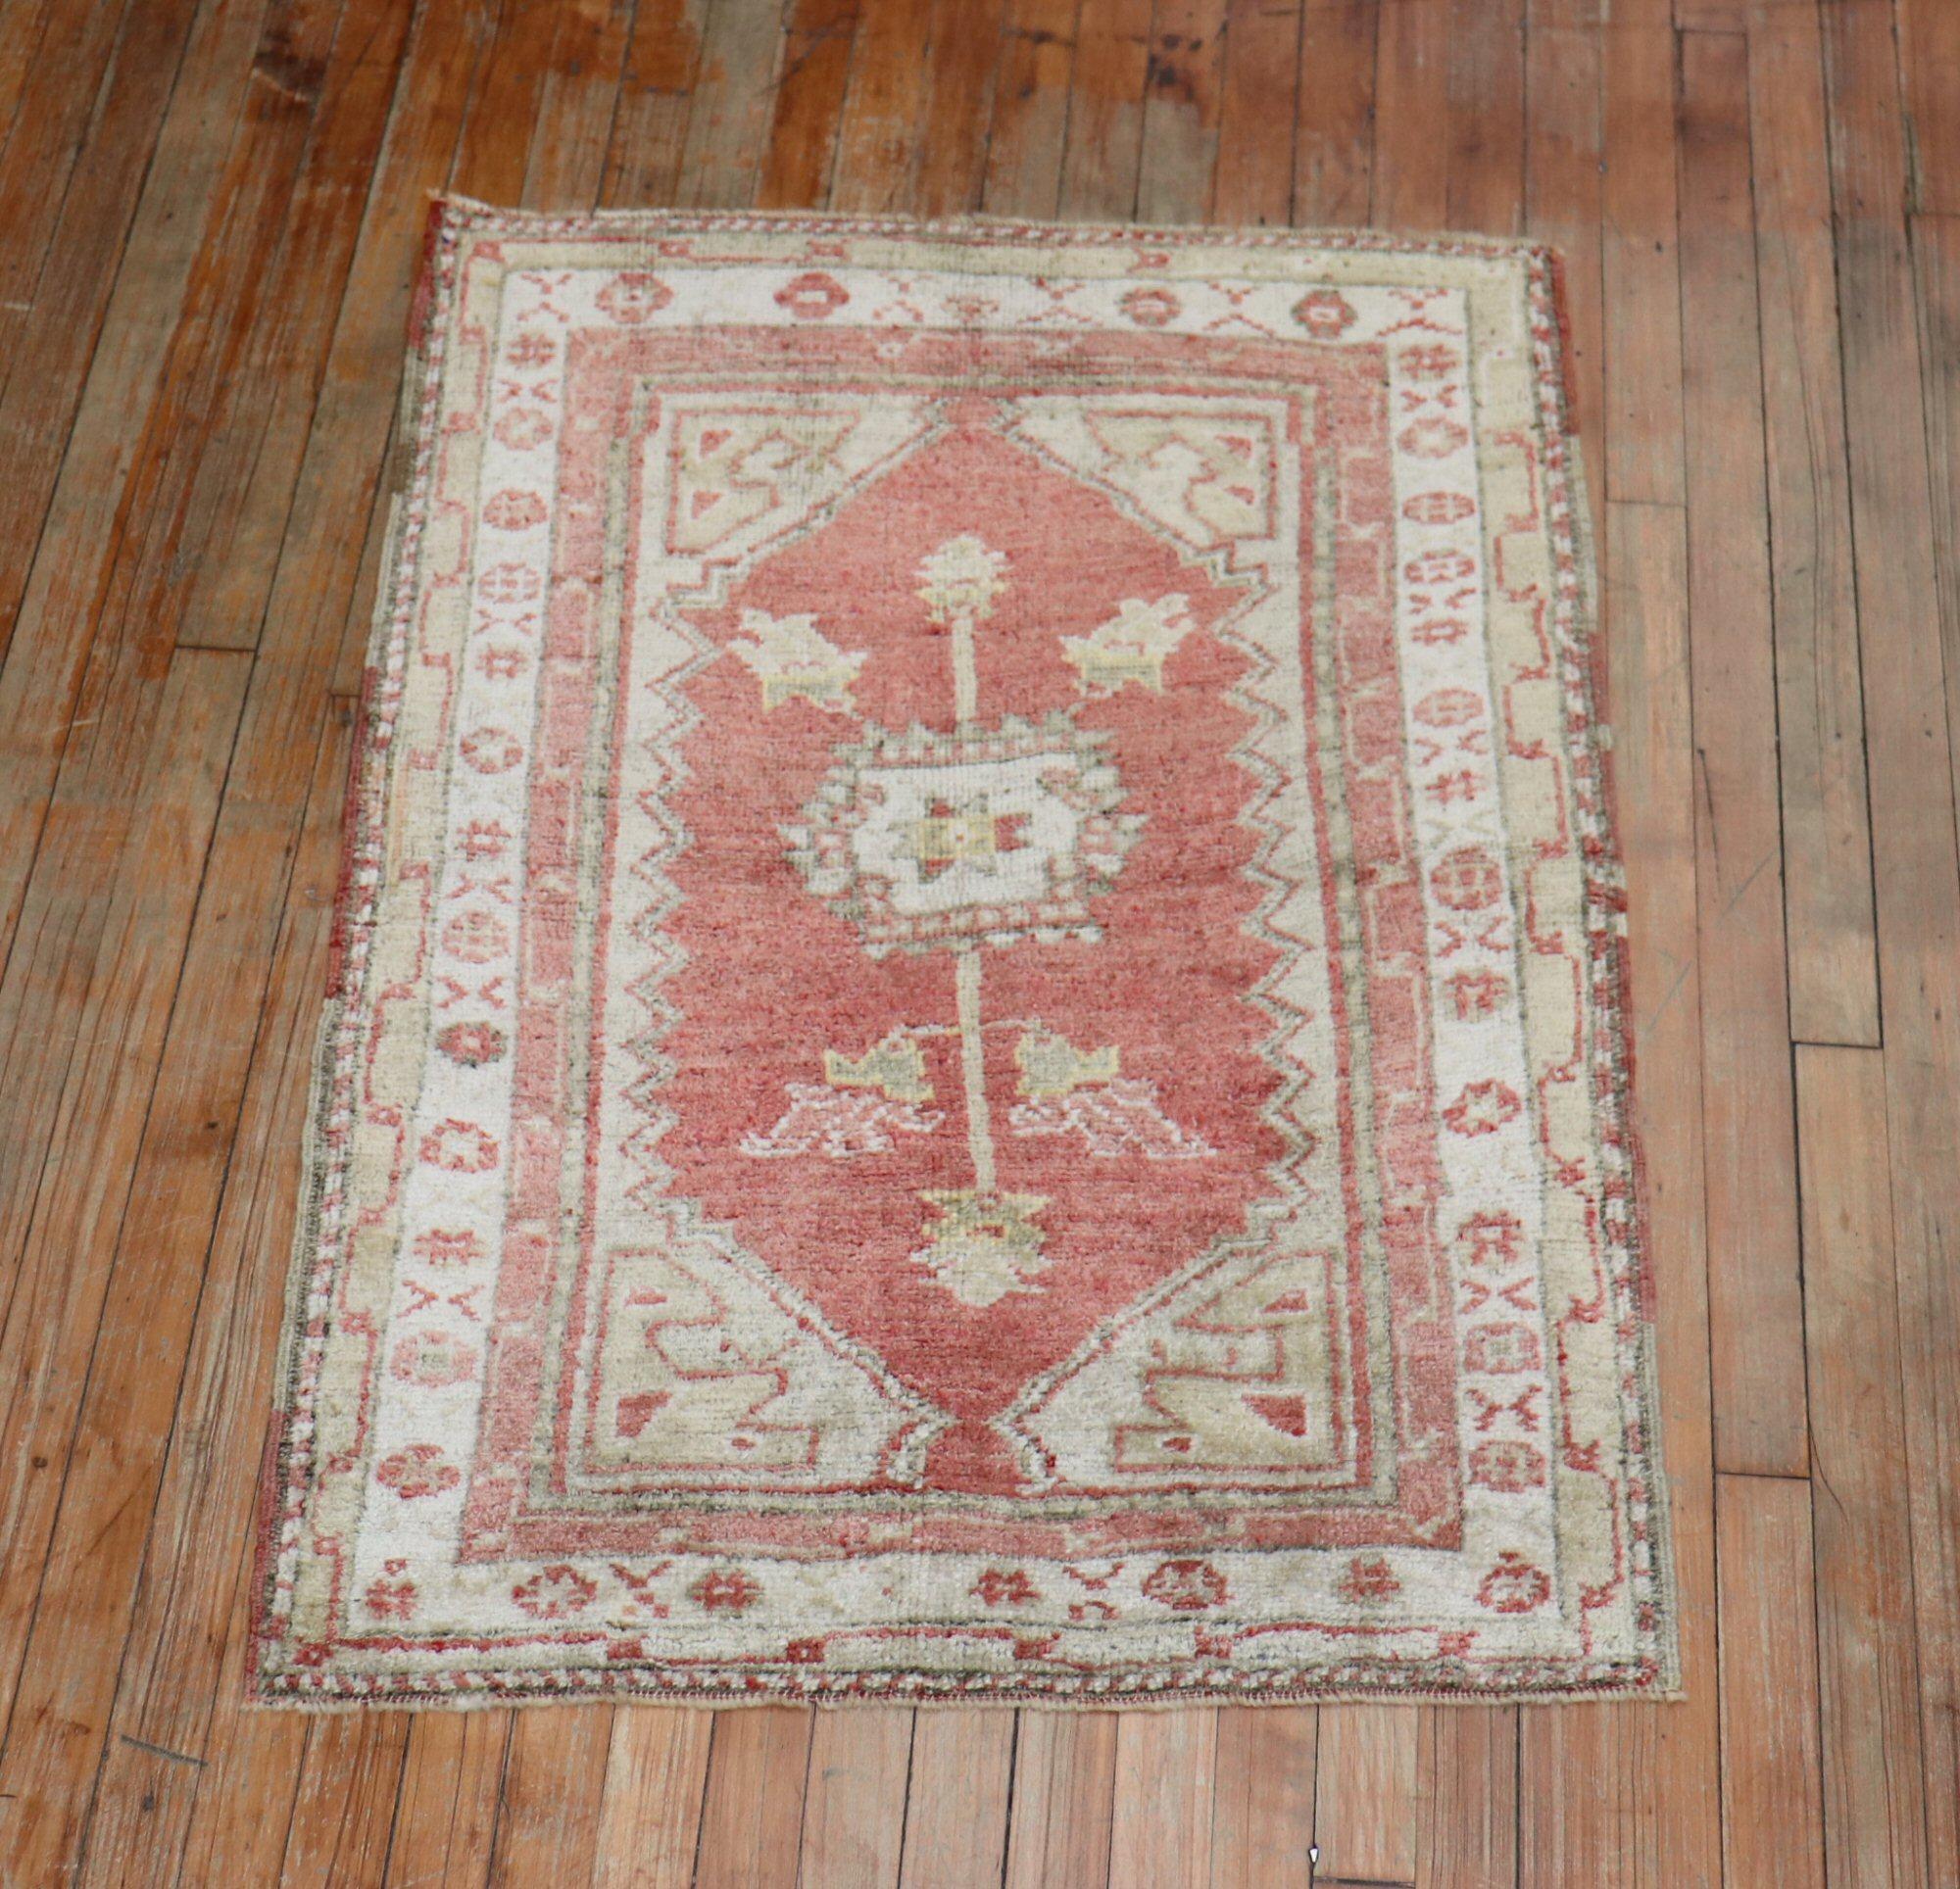 One of a Kind vintage Turkish Anatolian rug with a soft melon red, accents in gray and soft brown

Size: 2'10